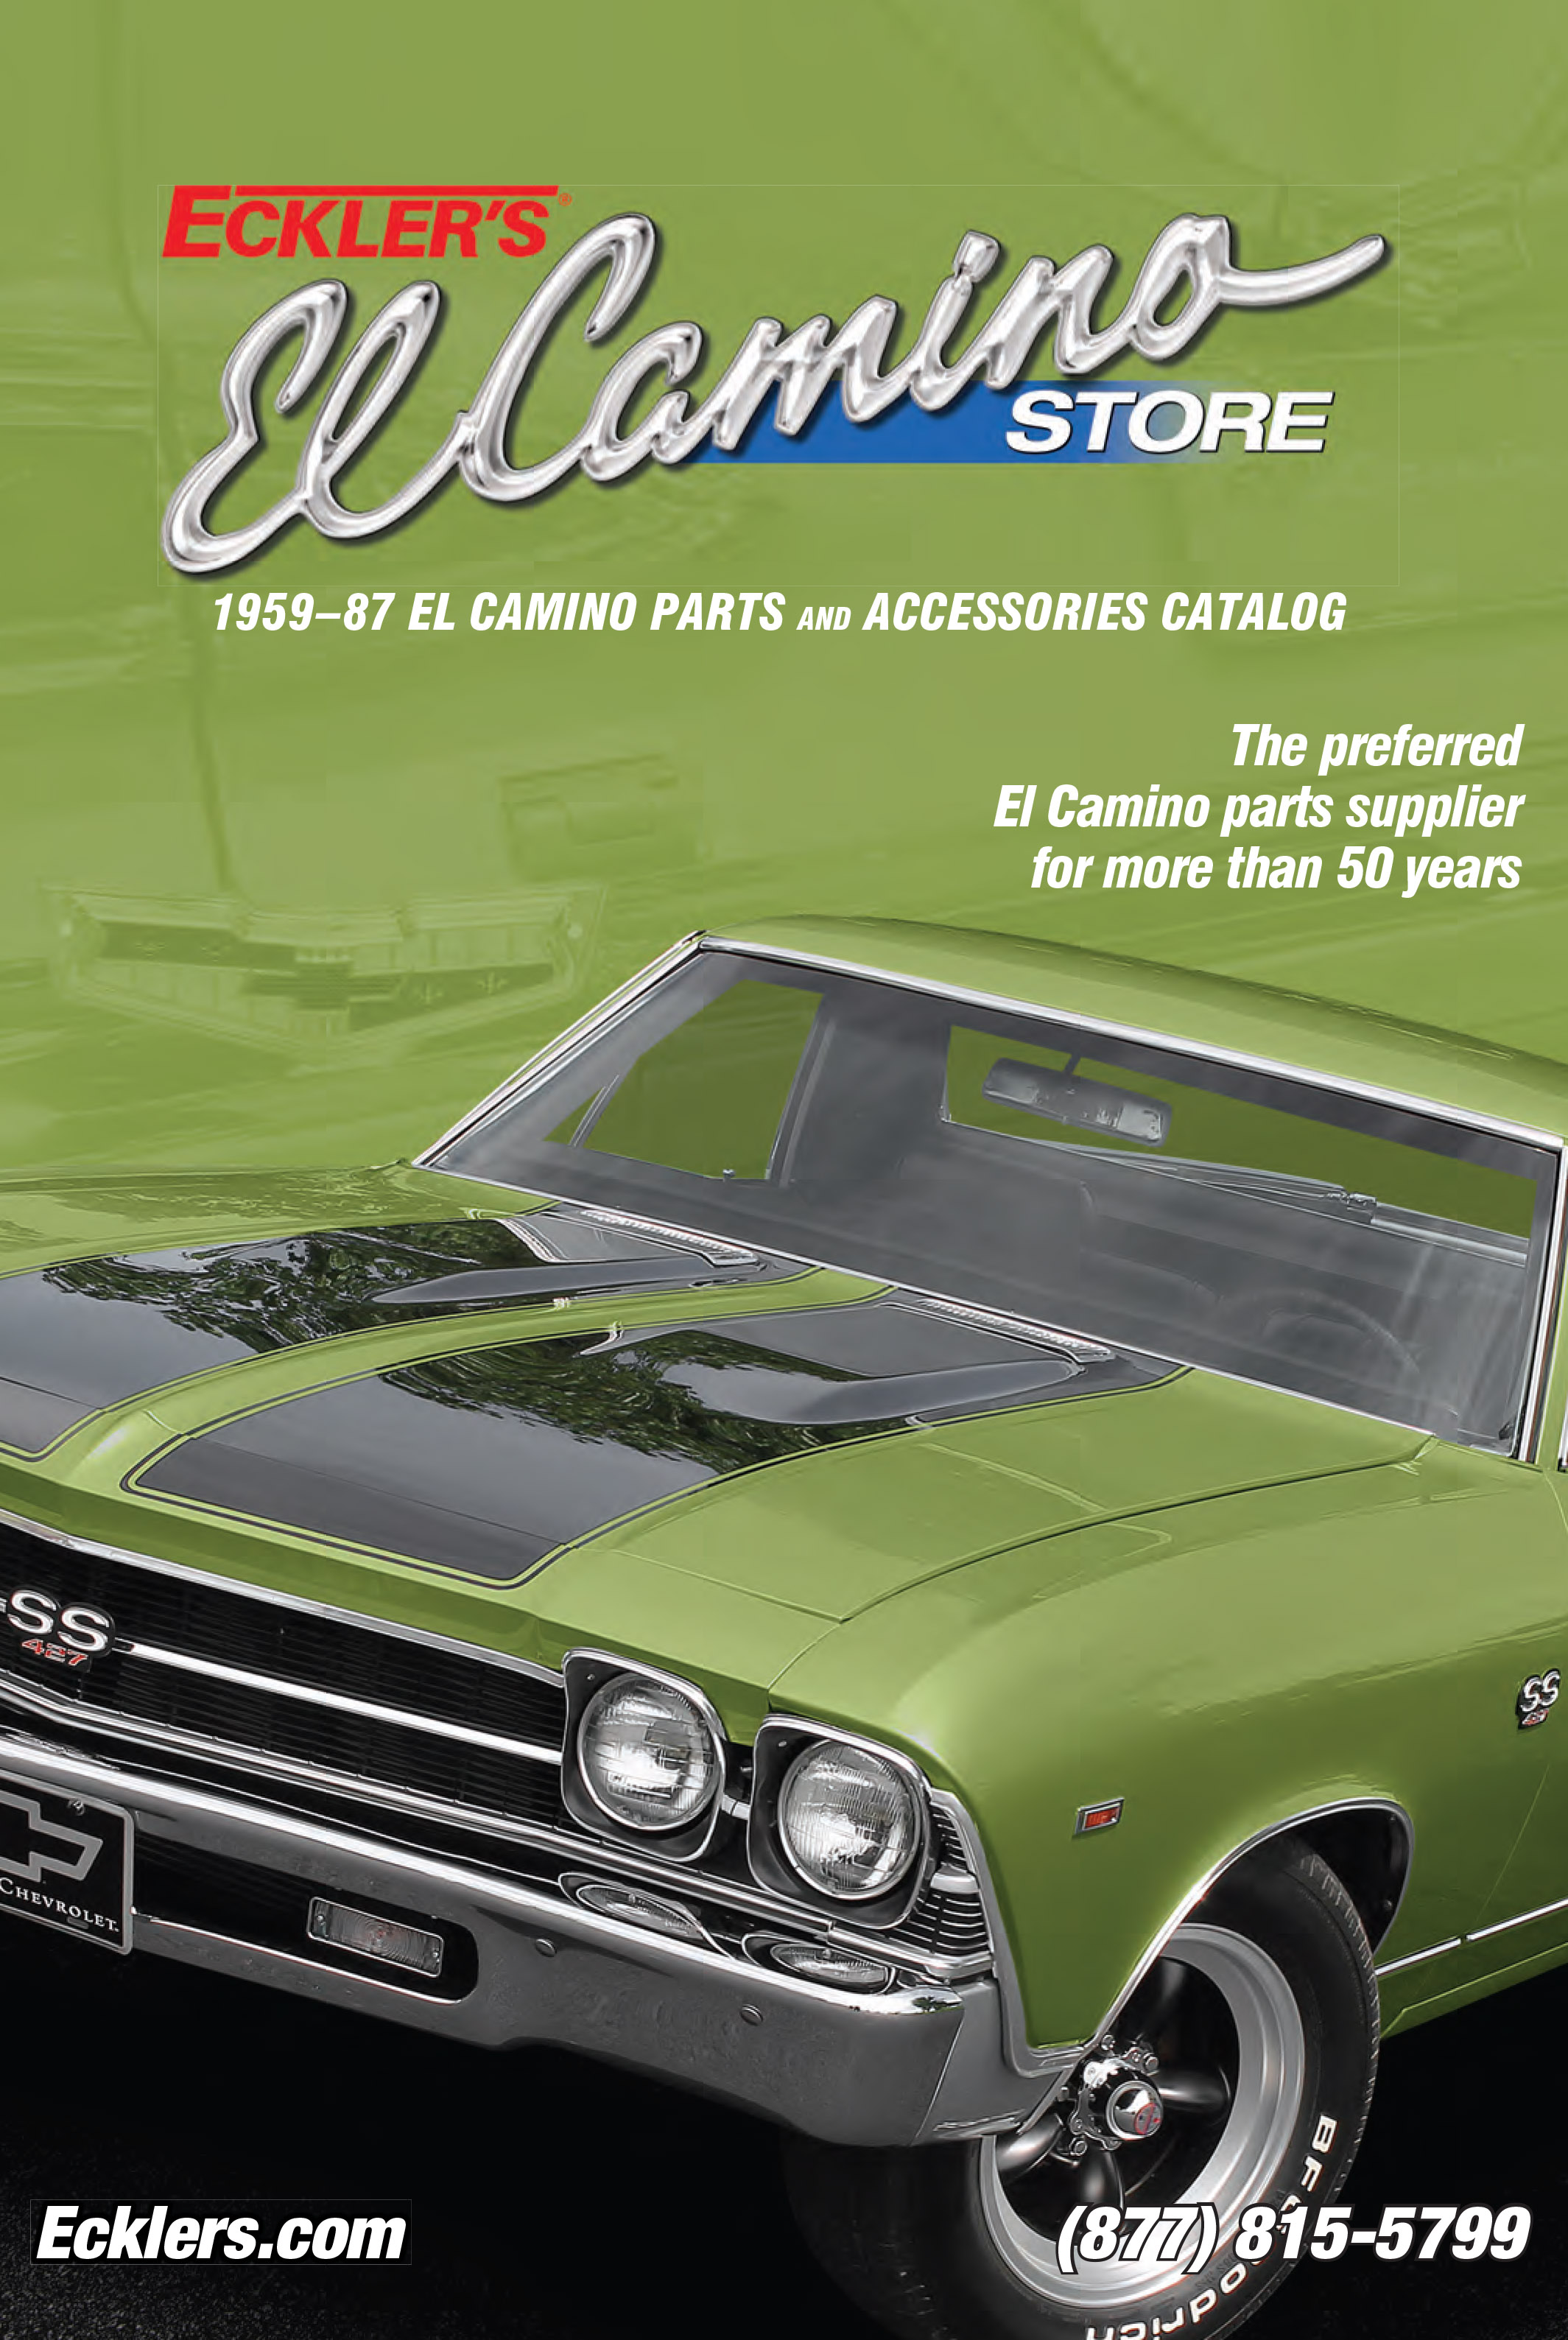 Request a Free Mail Order El Camino Store by Eckler’s 2022 Catalog